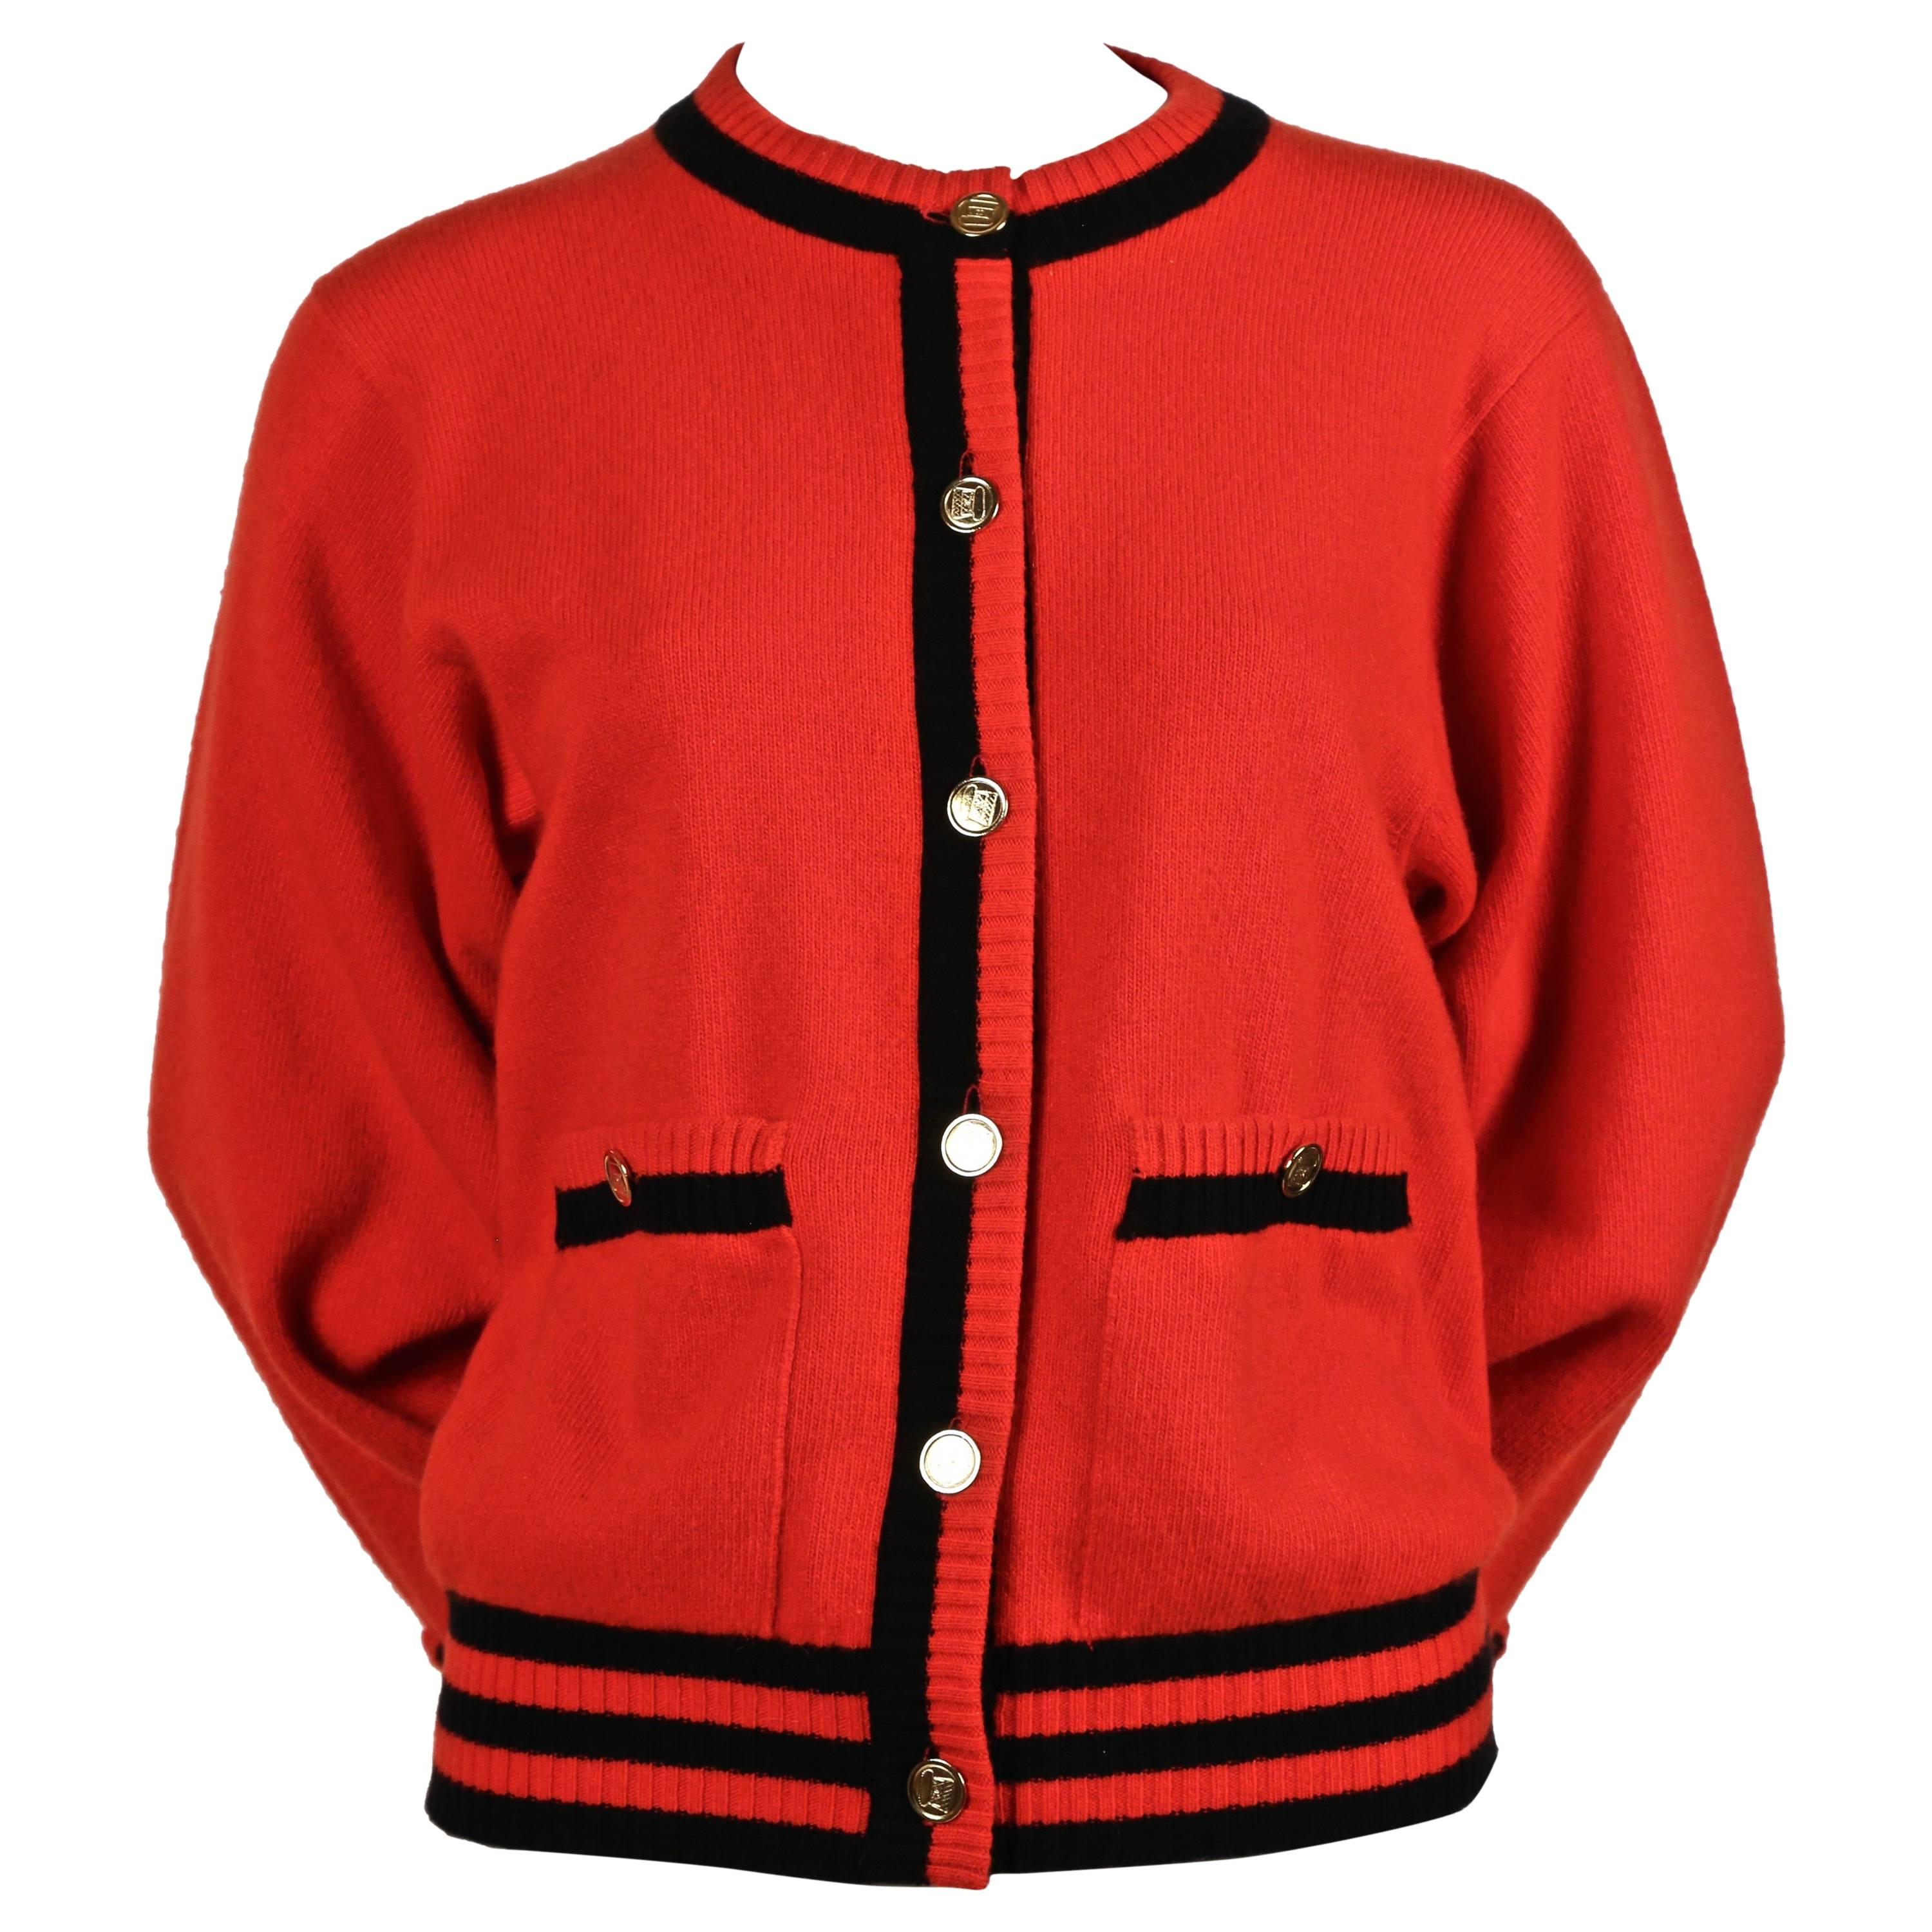 1980's CHANEL red and black cashmere cardigan sweater